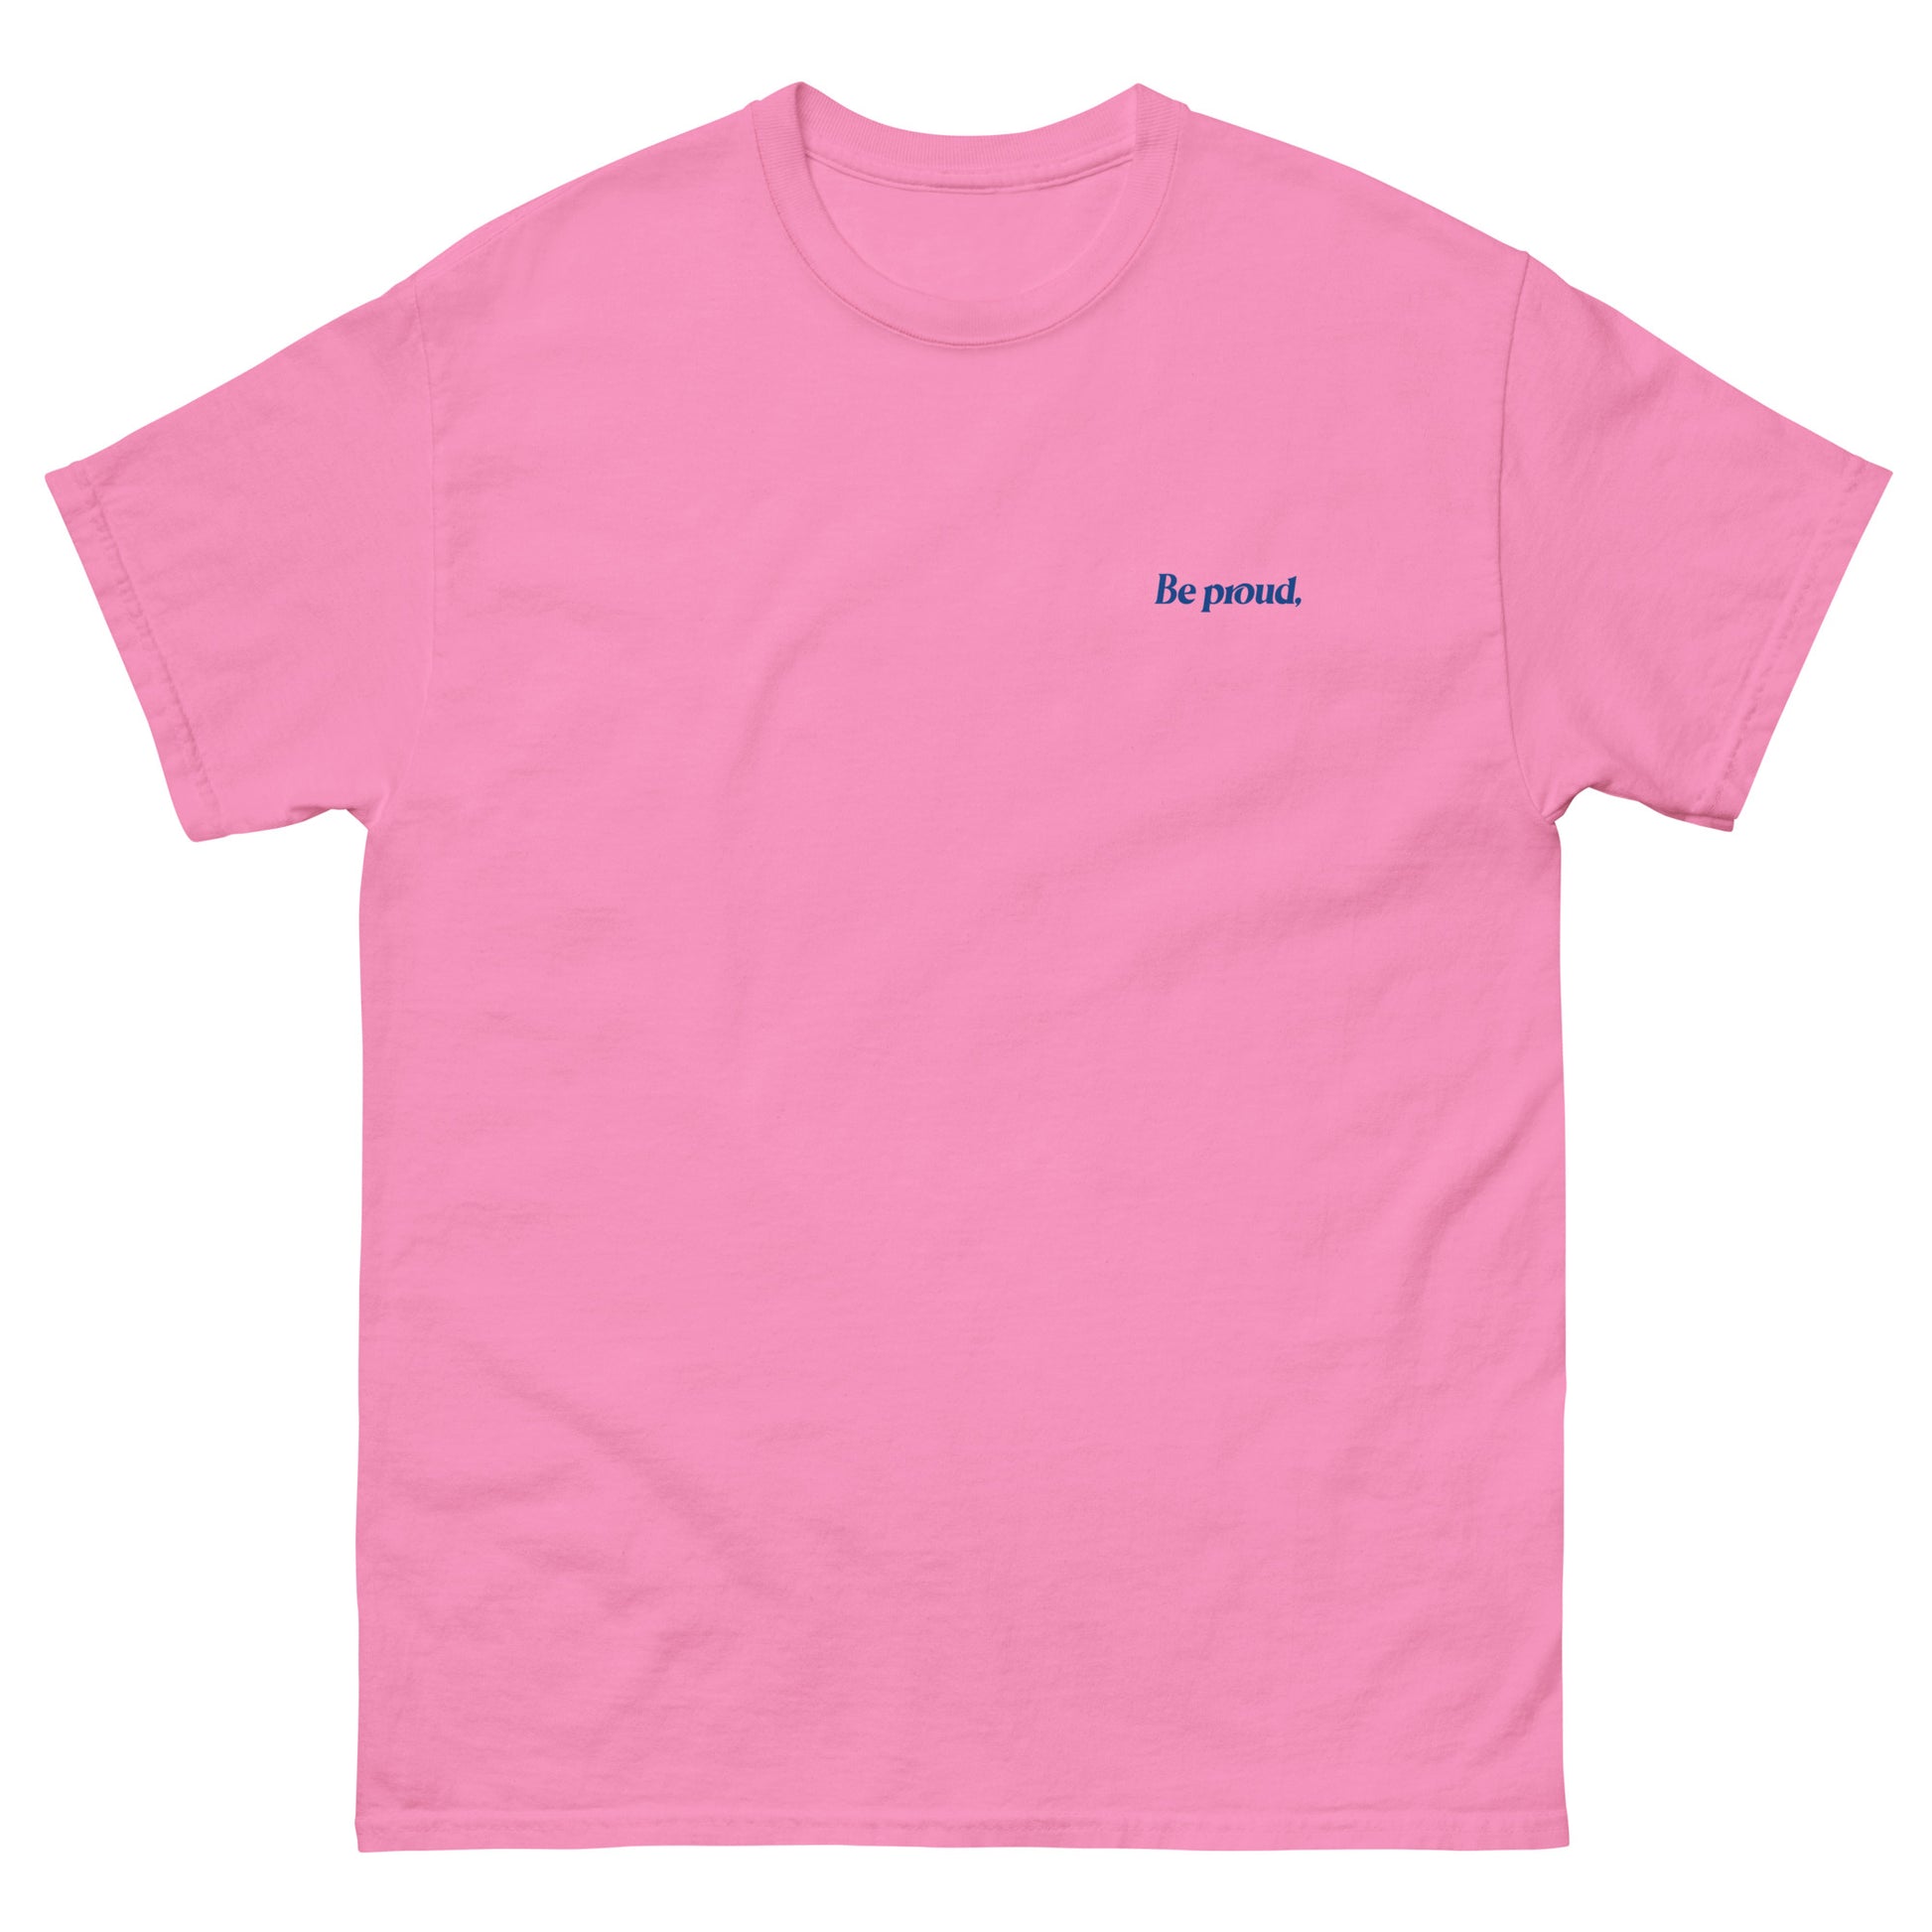 Pink High Quality Tee - Front Design with "Be proud, " print on left chest - Back Design with a Phrase "Be proud, you survived the days you thought you couldn't." print